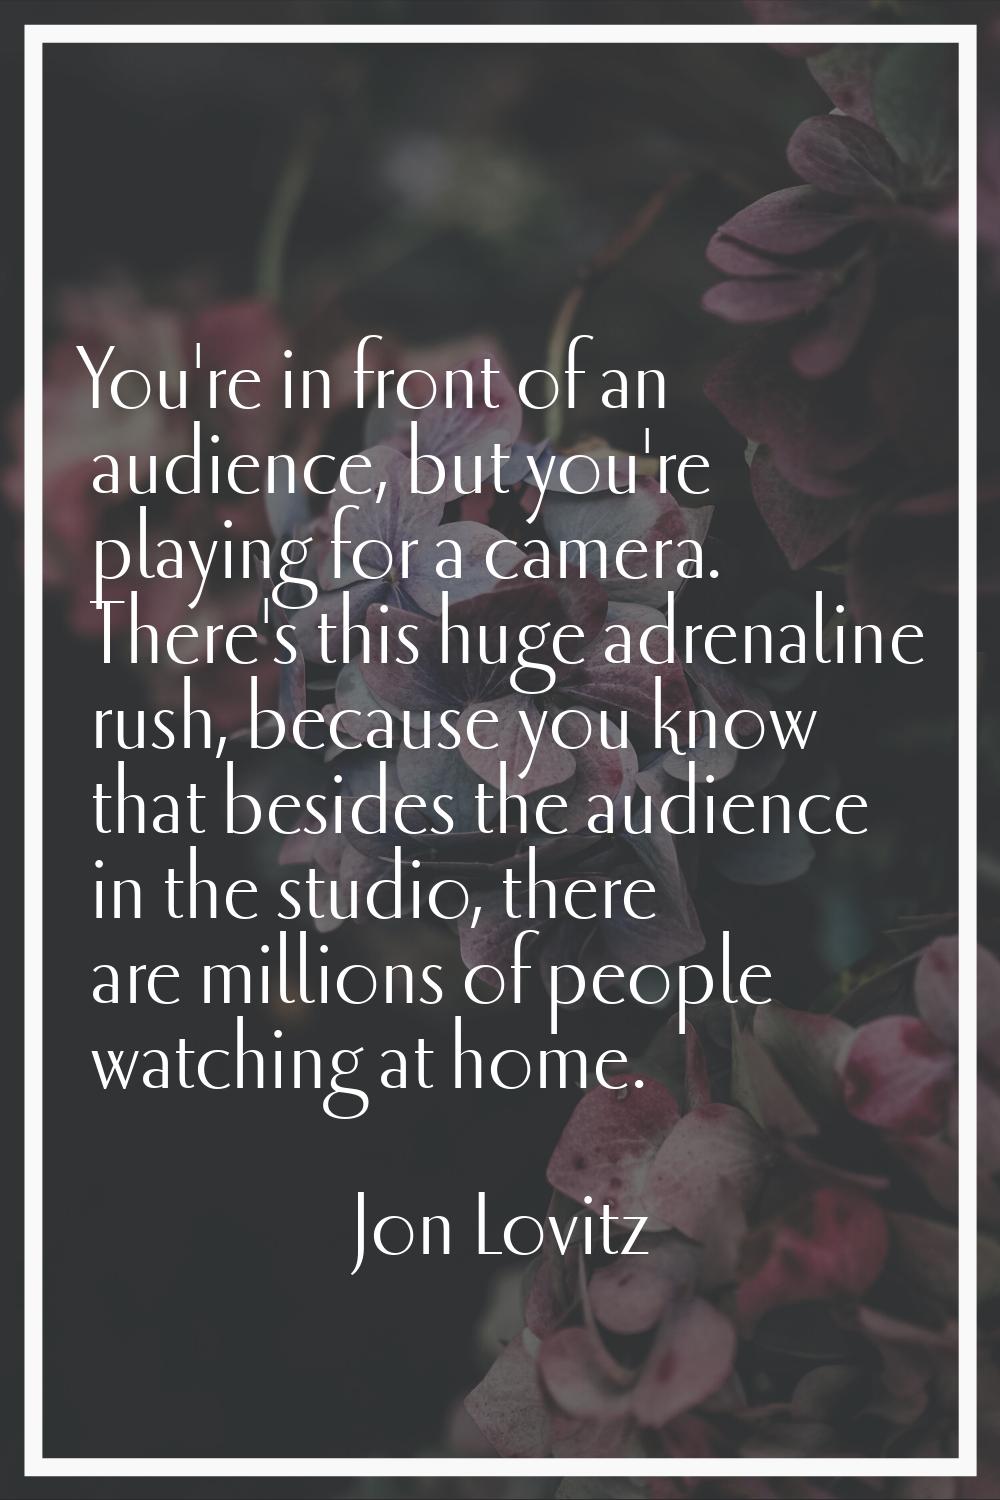 You're in front of an audience, but you're playing for a camera. There's this huge adrenaline rush,